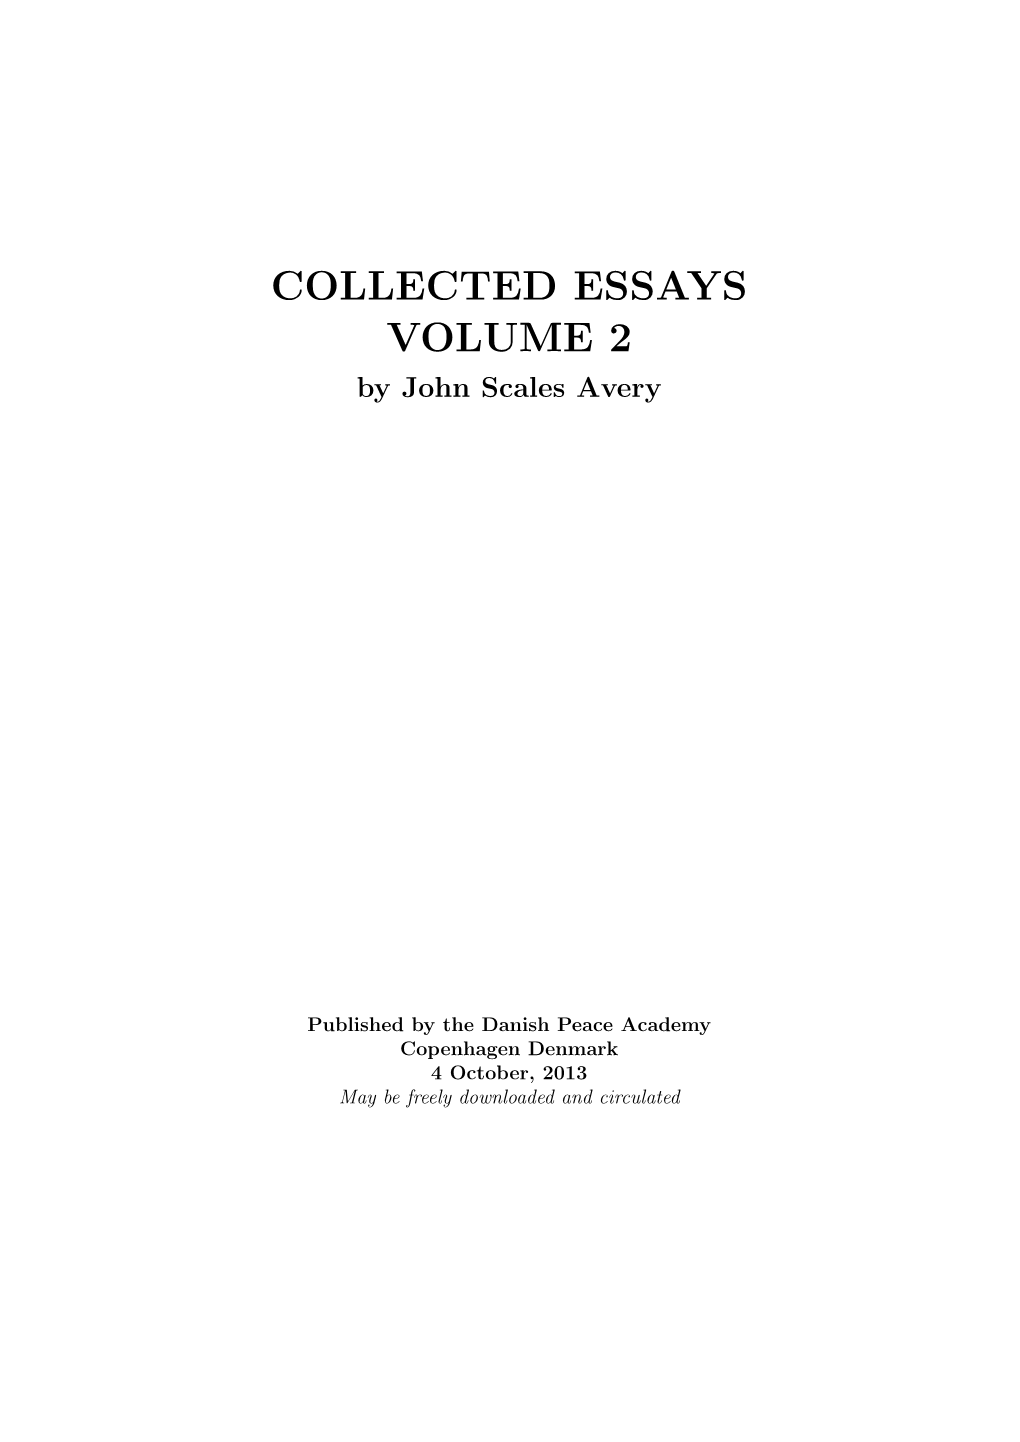 COLLECTED ESSAYS VOLUME 2 by John Scales Avery